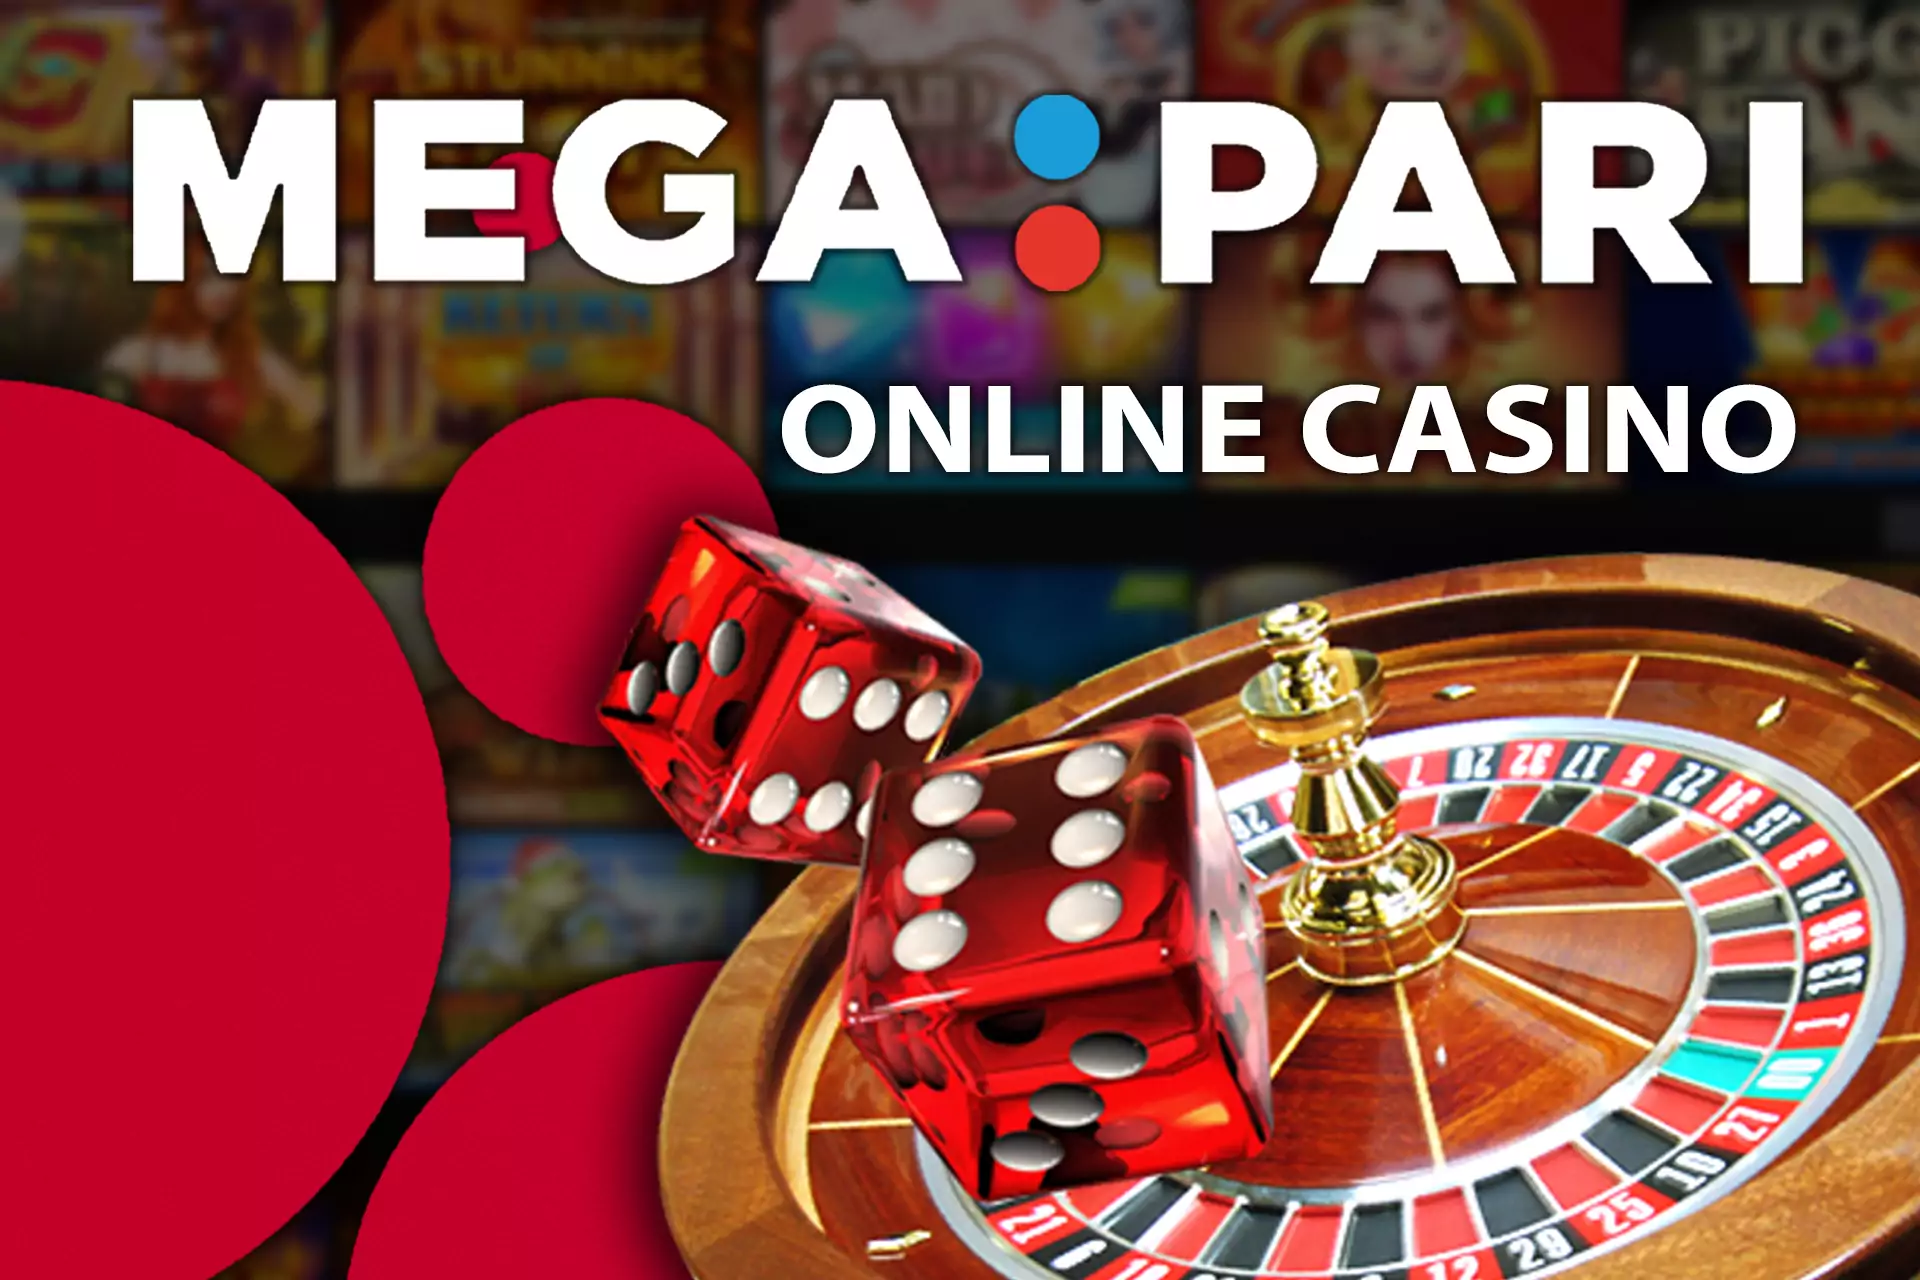 Between matches, you can play slots or table games at the MegaPari Casino.